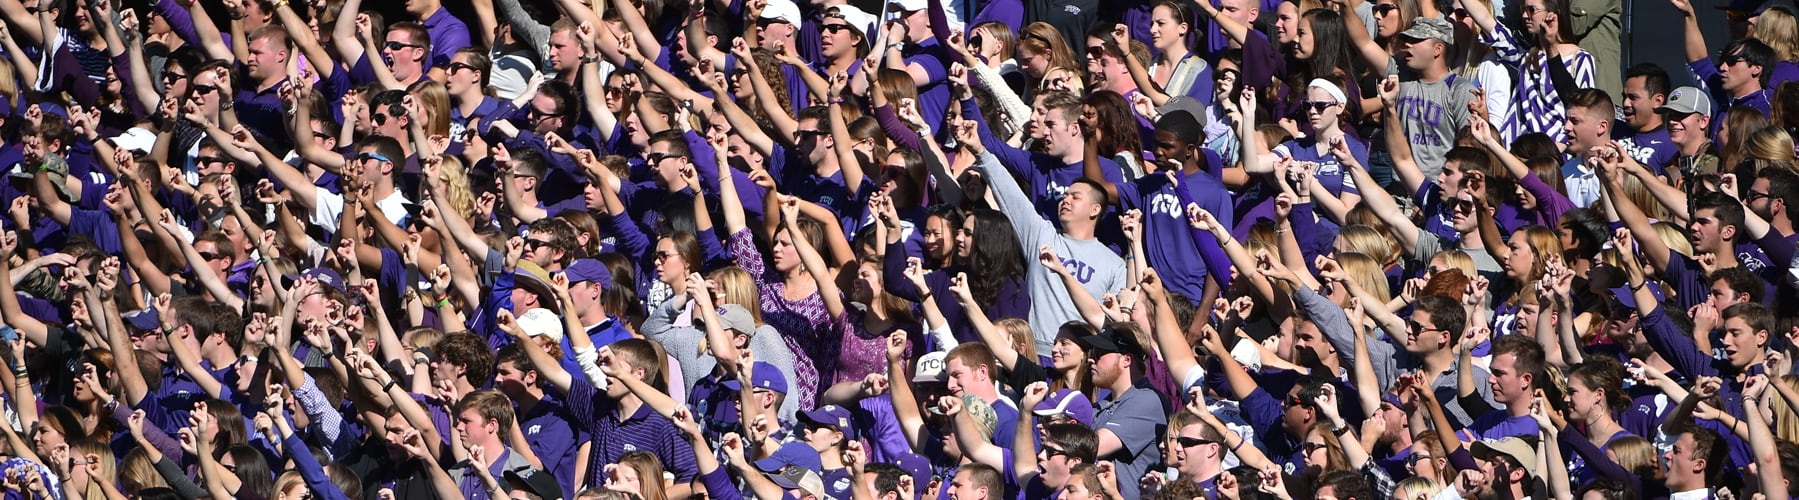 Packed student section at TCU football game